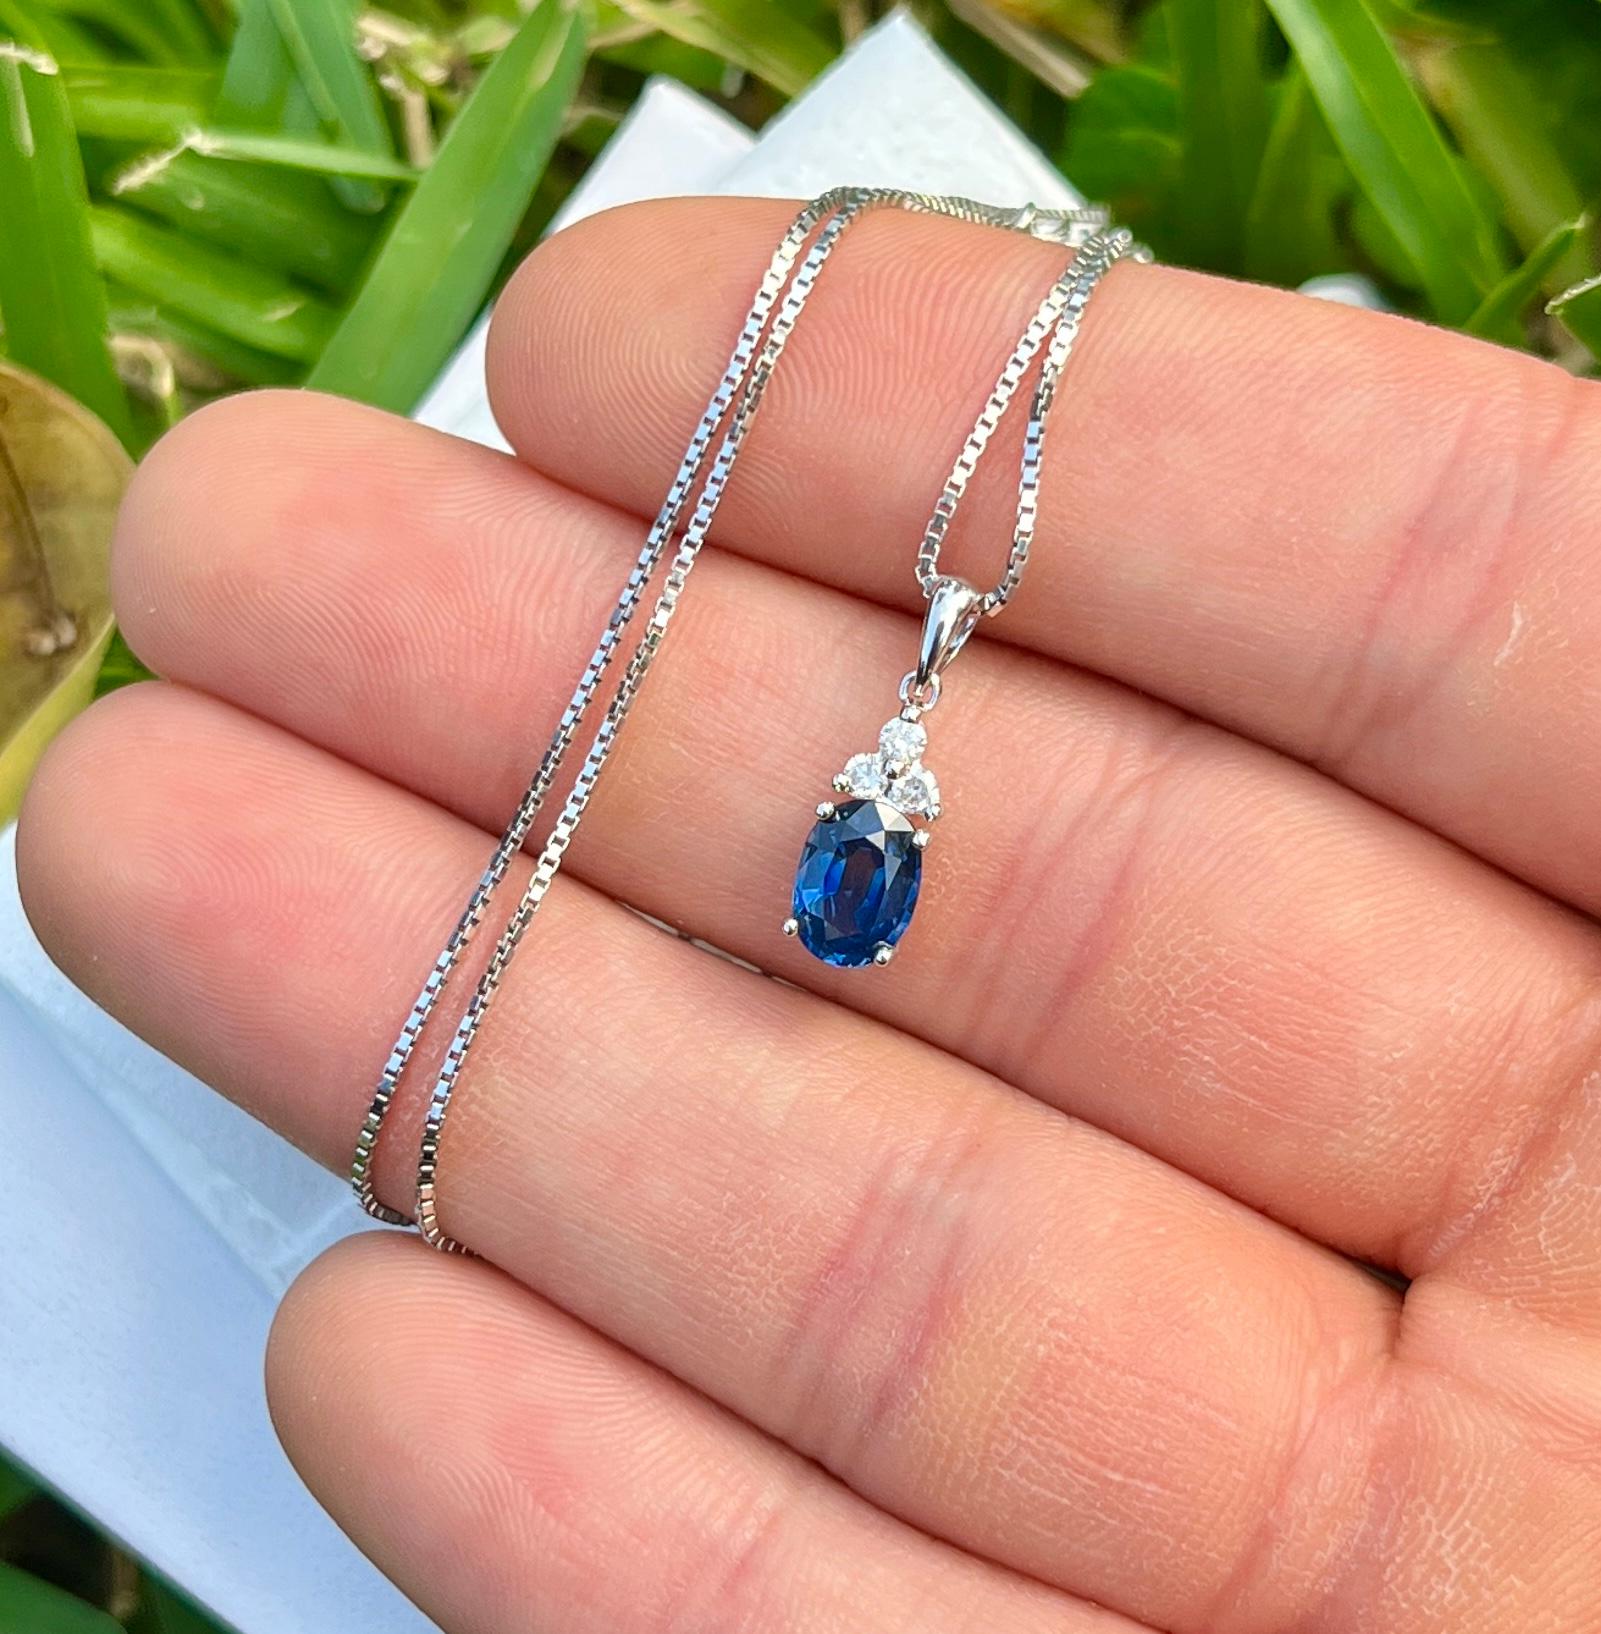 18-karat solid white gold drop pendant mounts a 1.20 carat natural Blue Sapphire. The pendant features a dynamic bail that connects 3 round-cut natural diamonds that form a triangle on the top. The Sapphire center stone is full of color, brilliance,